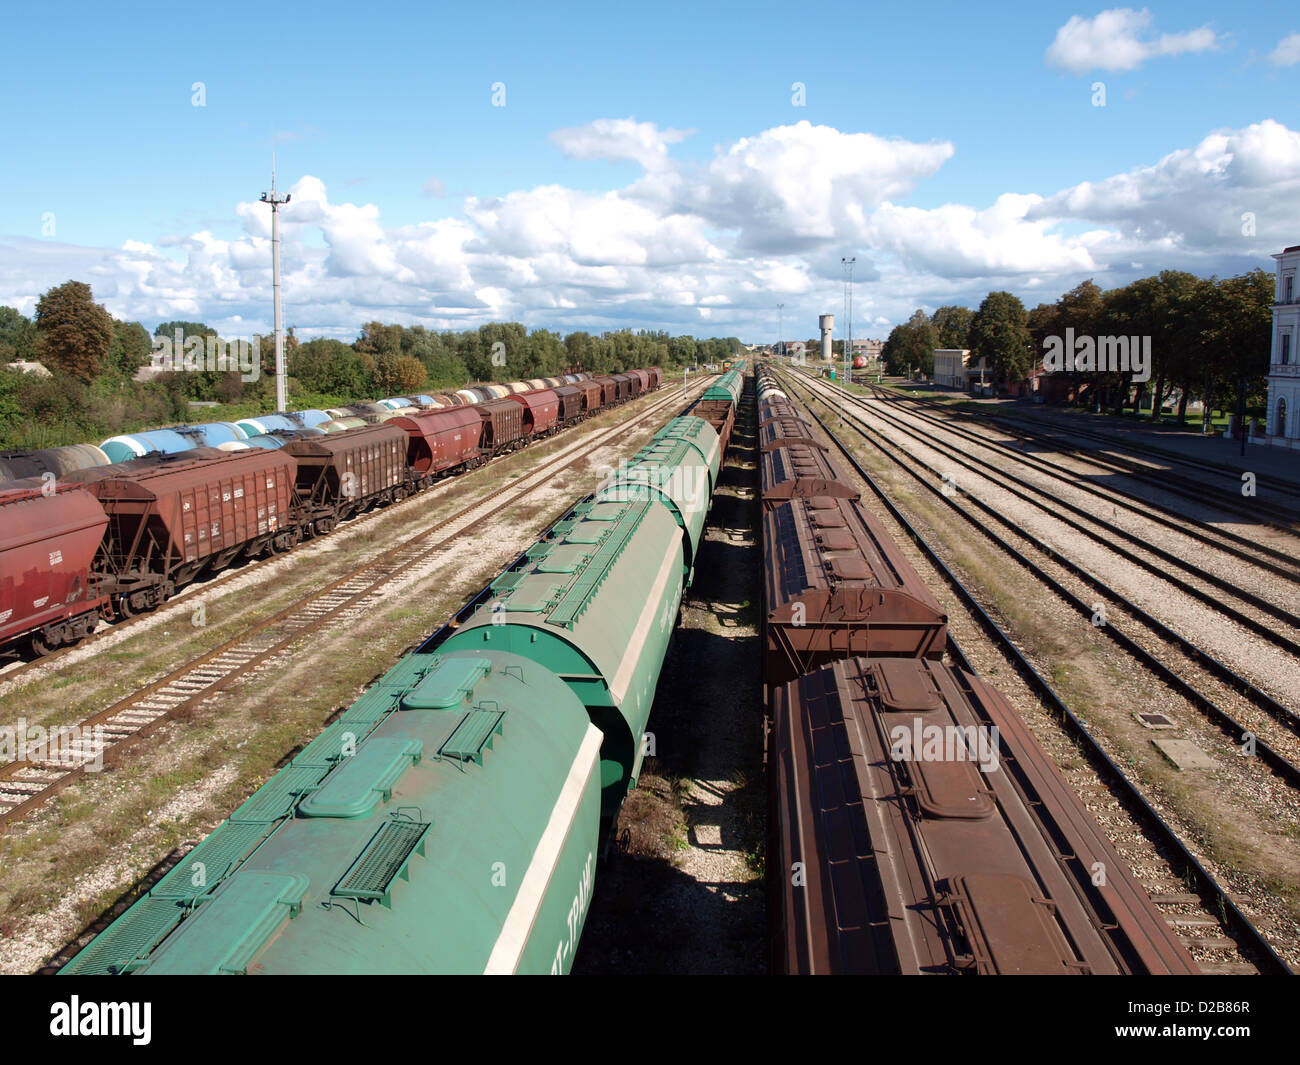 Freight train wagons on the station rails Stock Photo